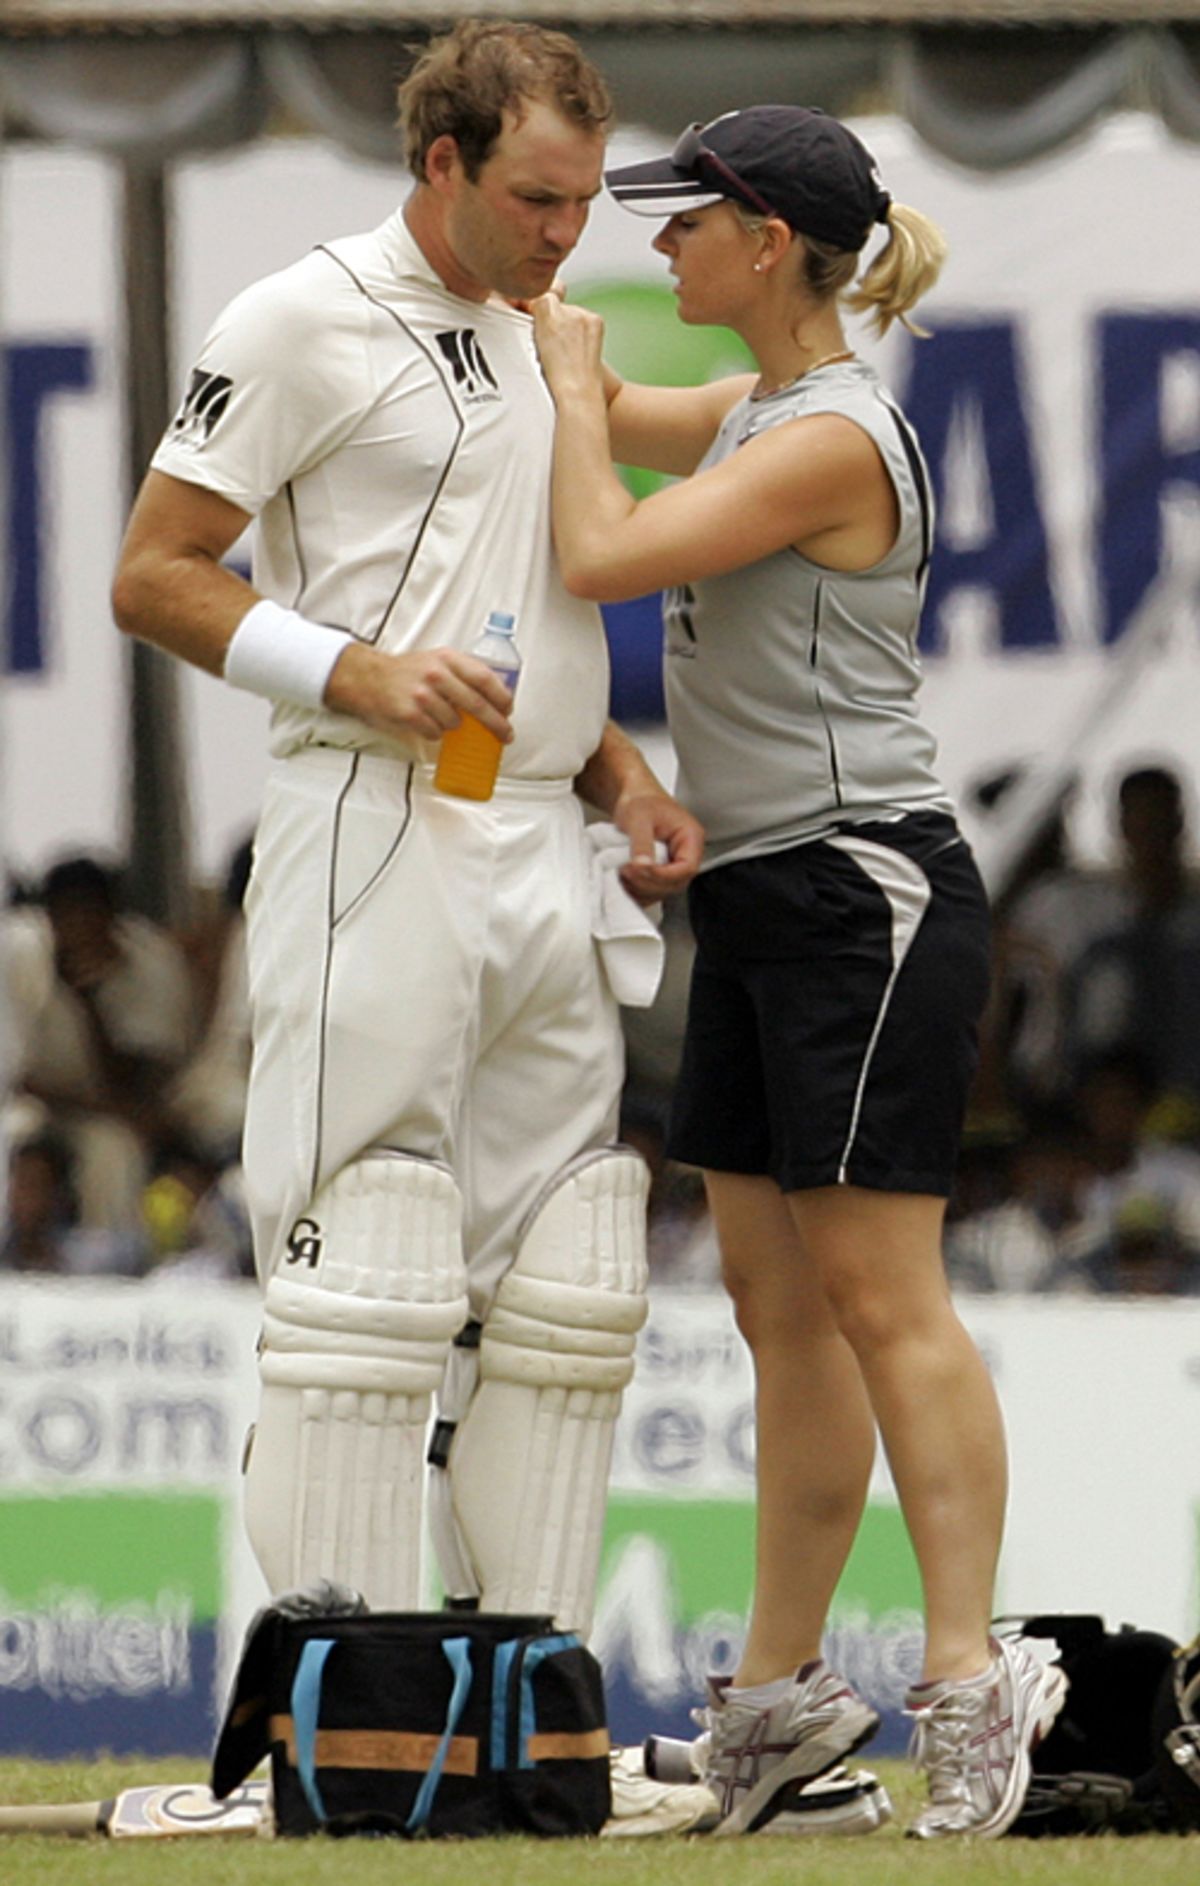 New Zealand physio Kate Stalker attends to Tim McIntosh, Sri Lanka v New Zealand, 1st Test, Galle, 3rd day, August 20, 2009